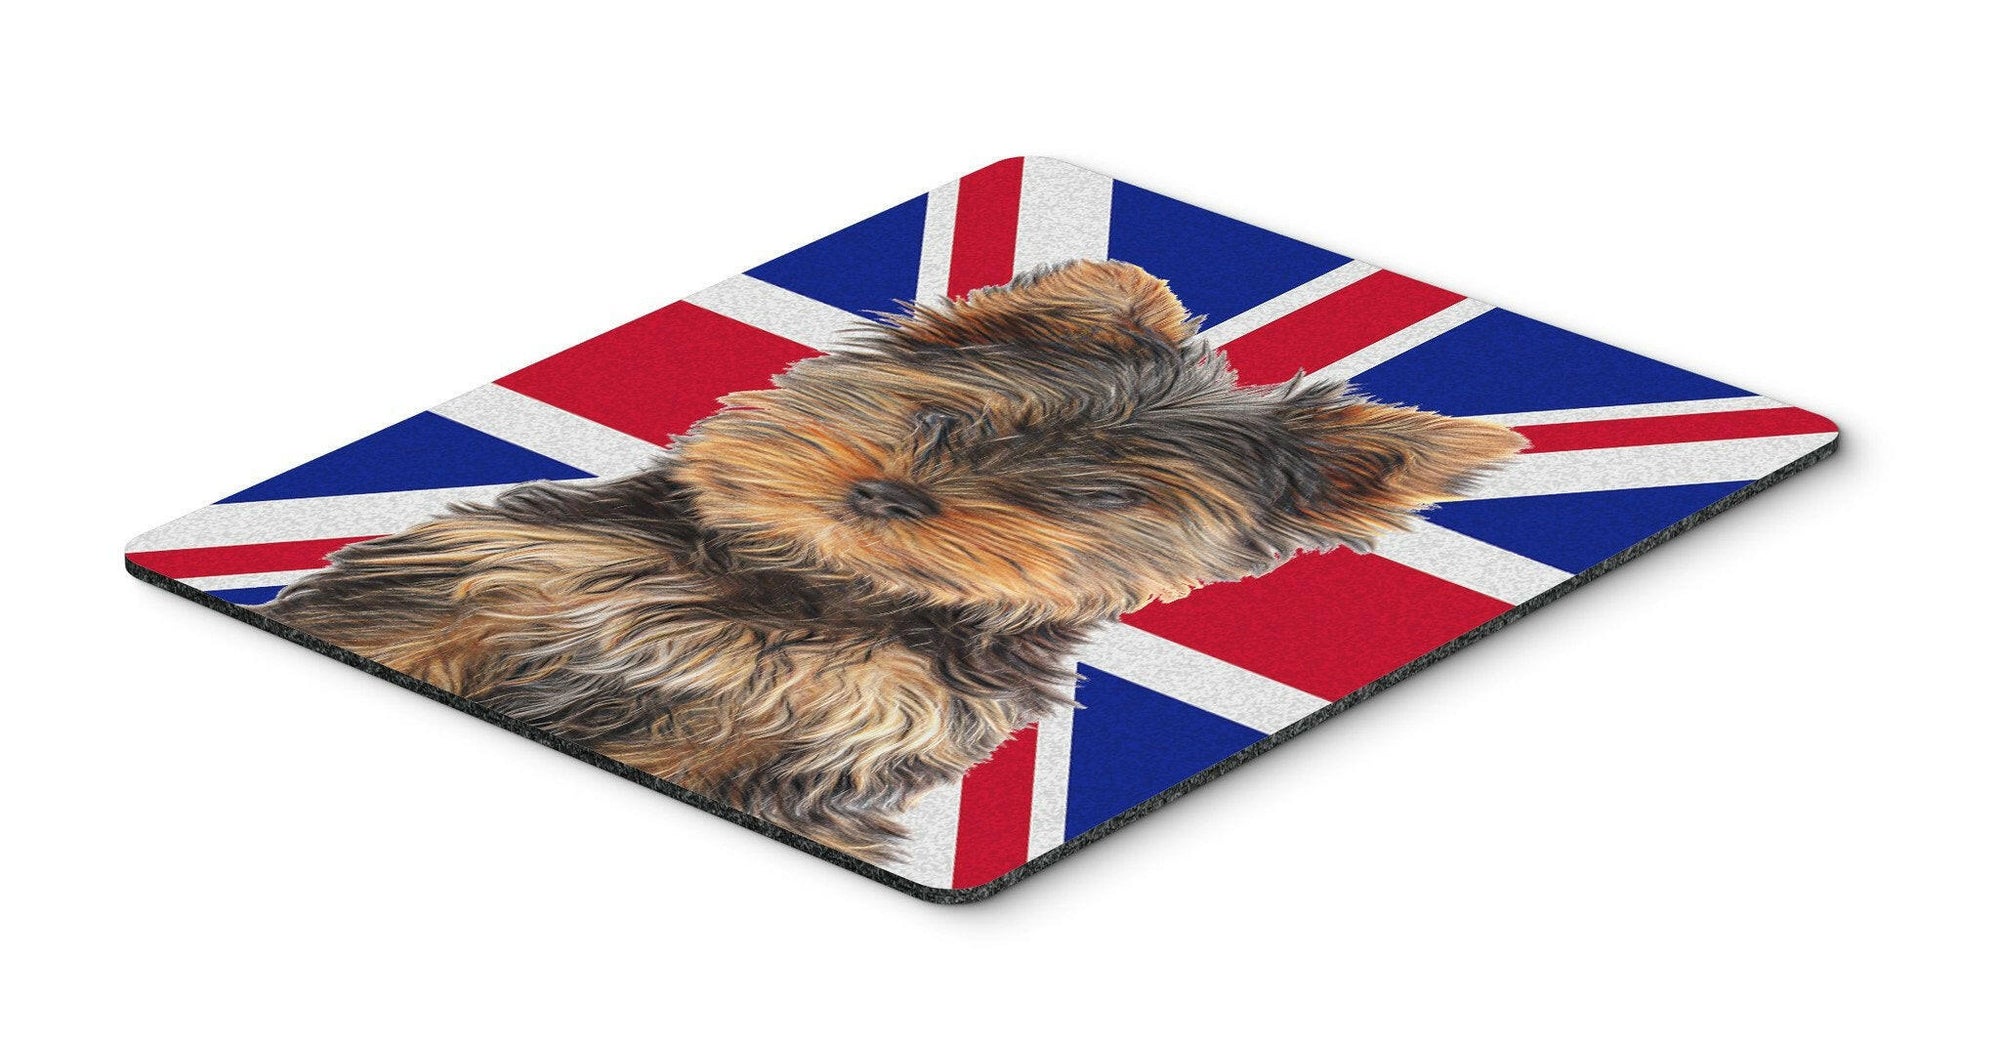 Yorkie Puppy / Yorkshire Terrier with English Union Jack British Flag Mouse Pad, Hot Pad or Trivet KJ1167MP by Caroline's Treasures